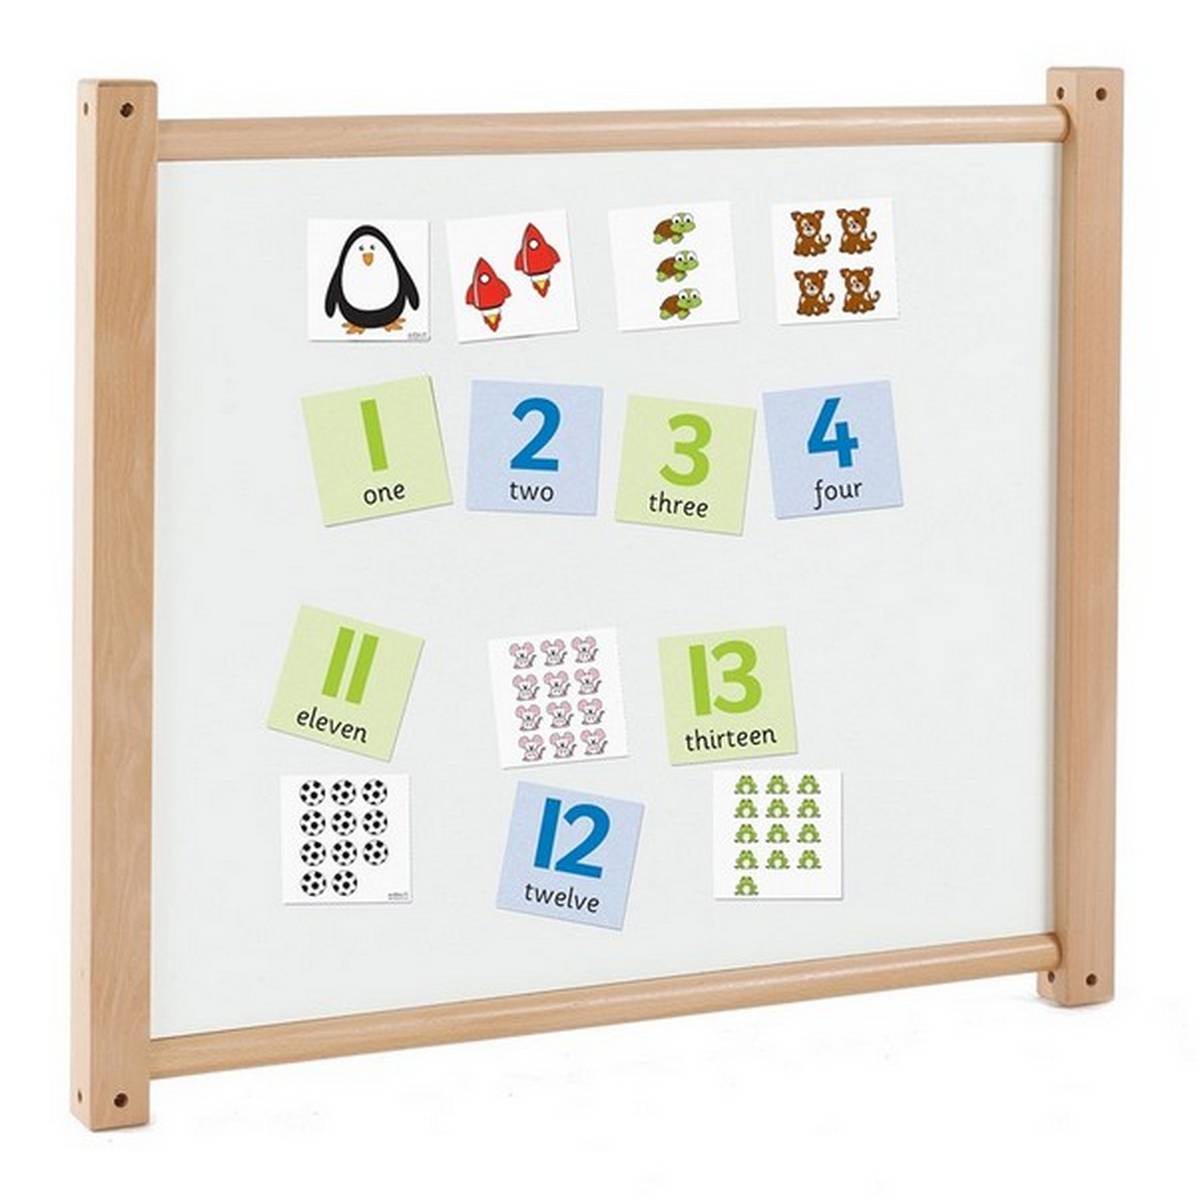 Toddler Magnetic Panel